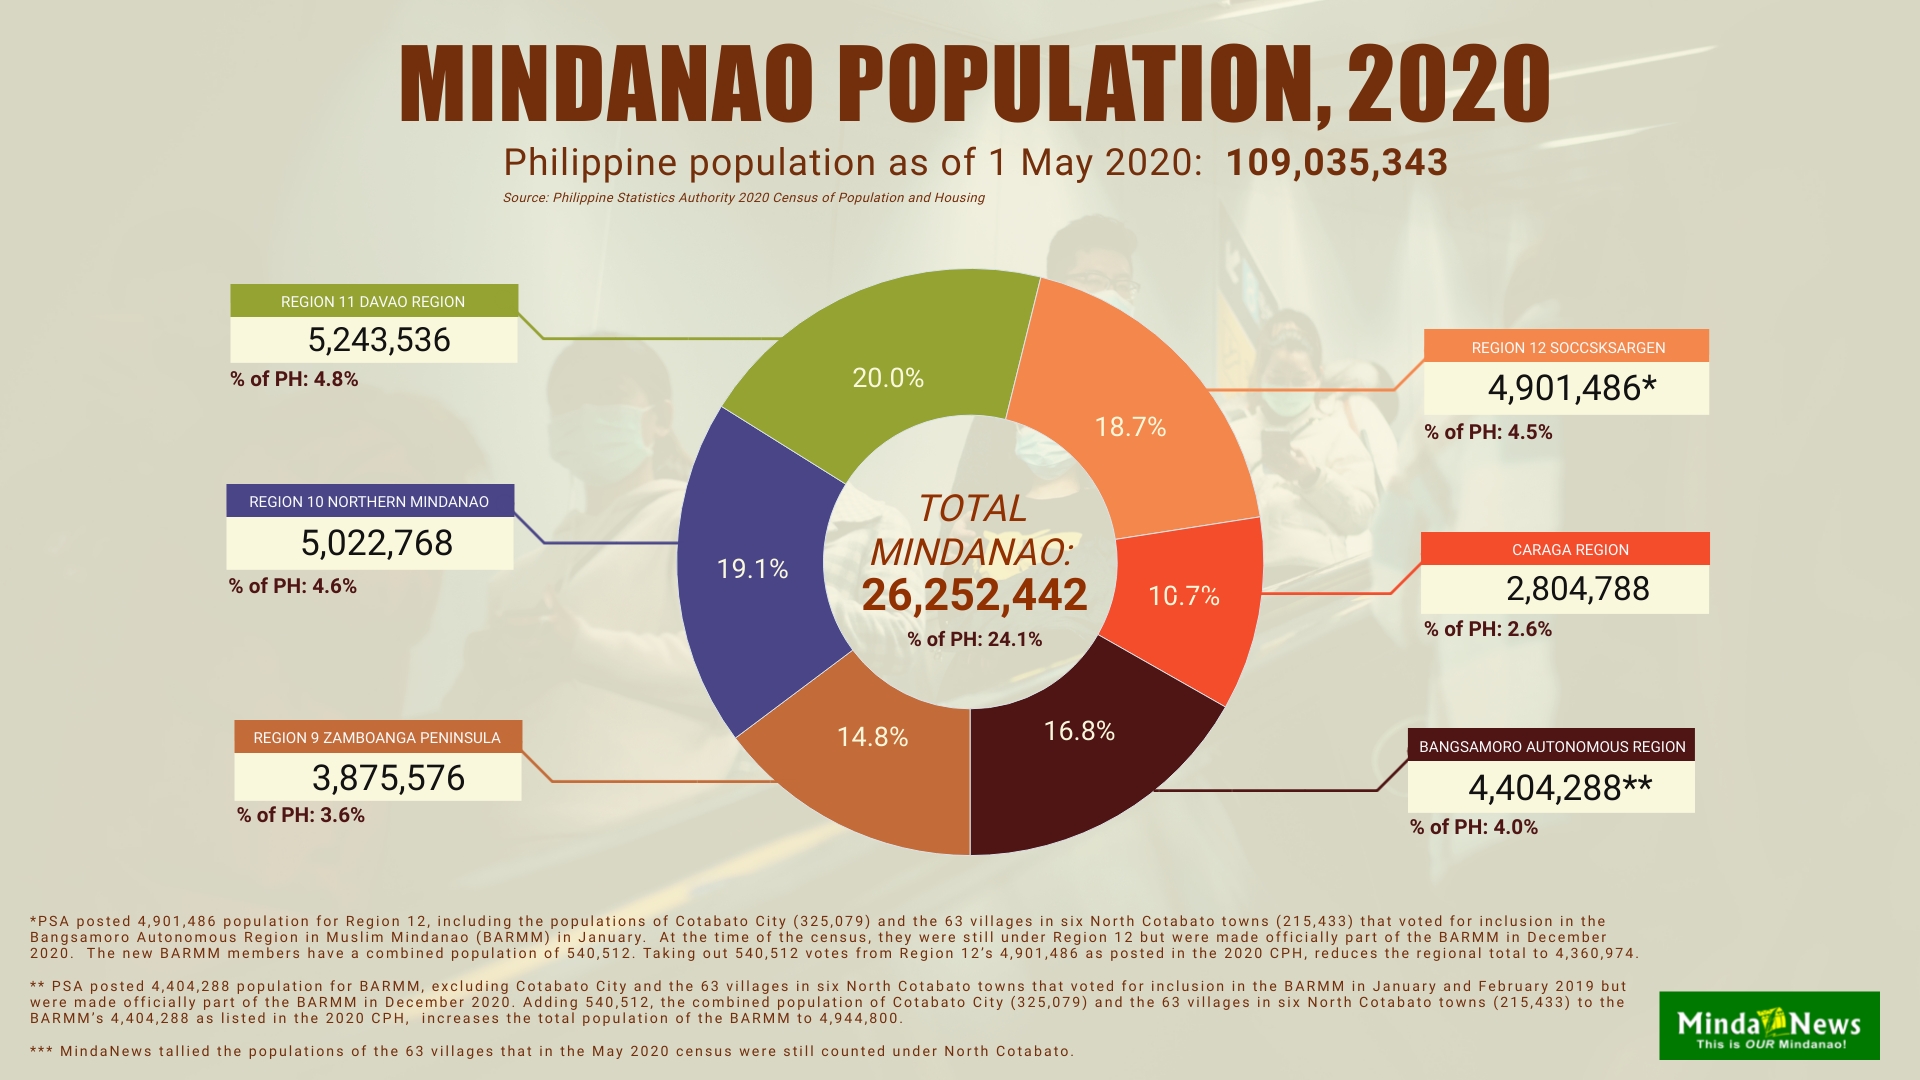 Mindanao’s population: from 24 million in 2015 to 26 million in 2020